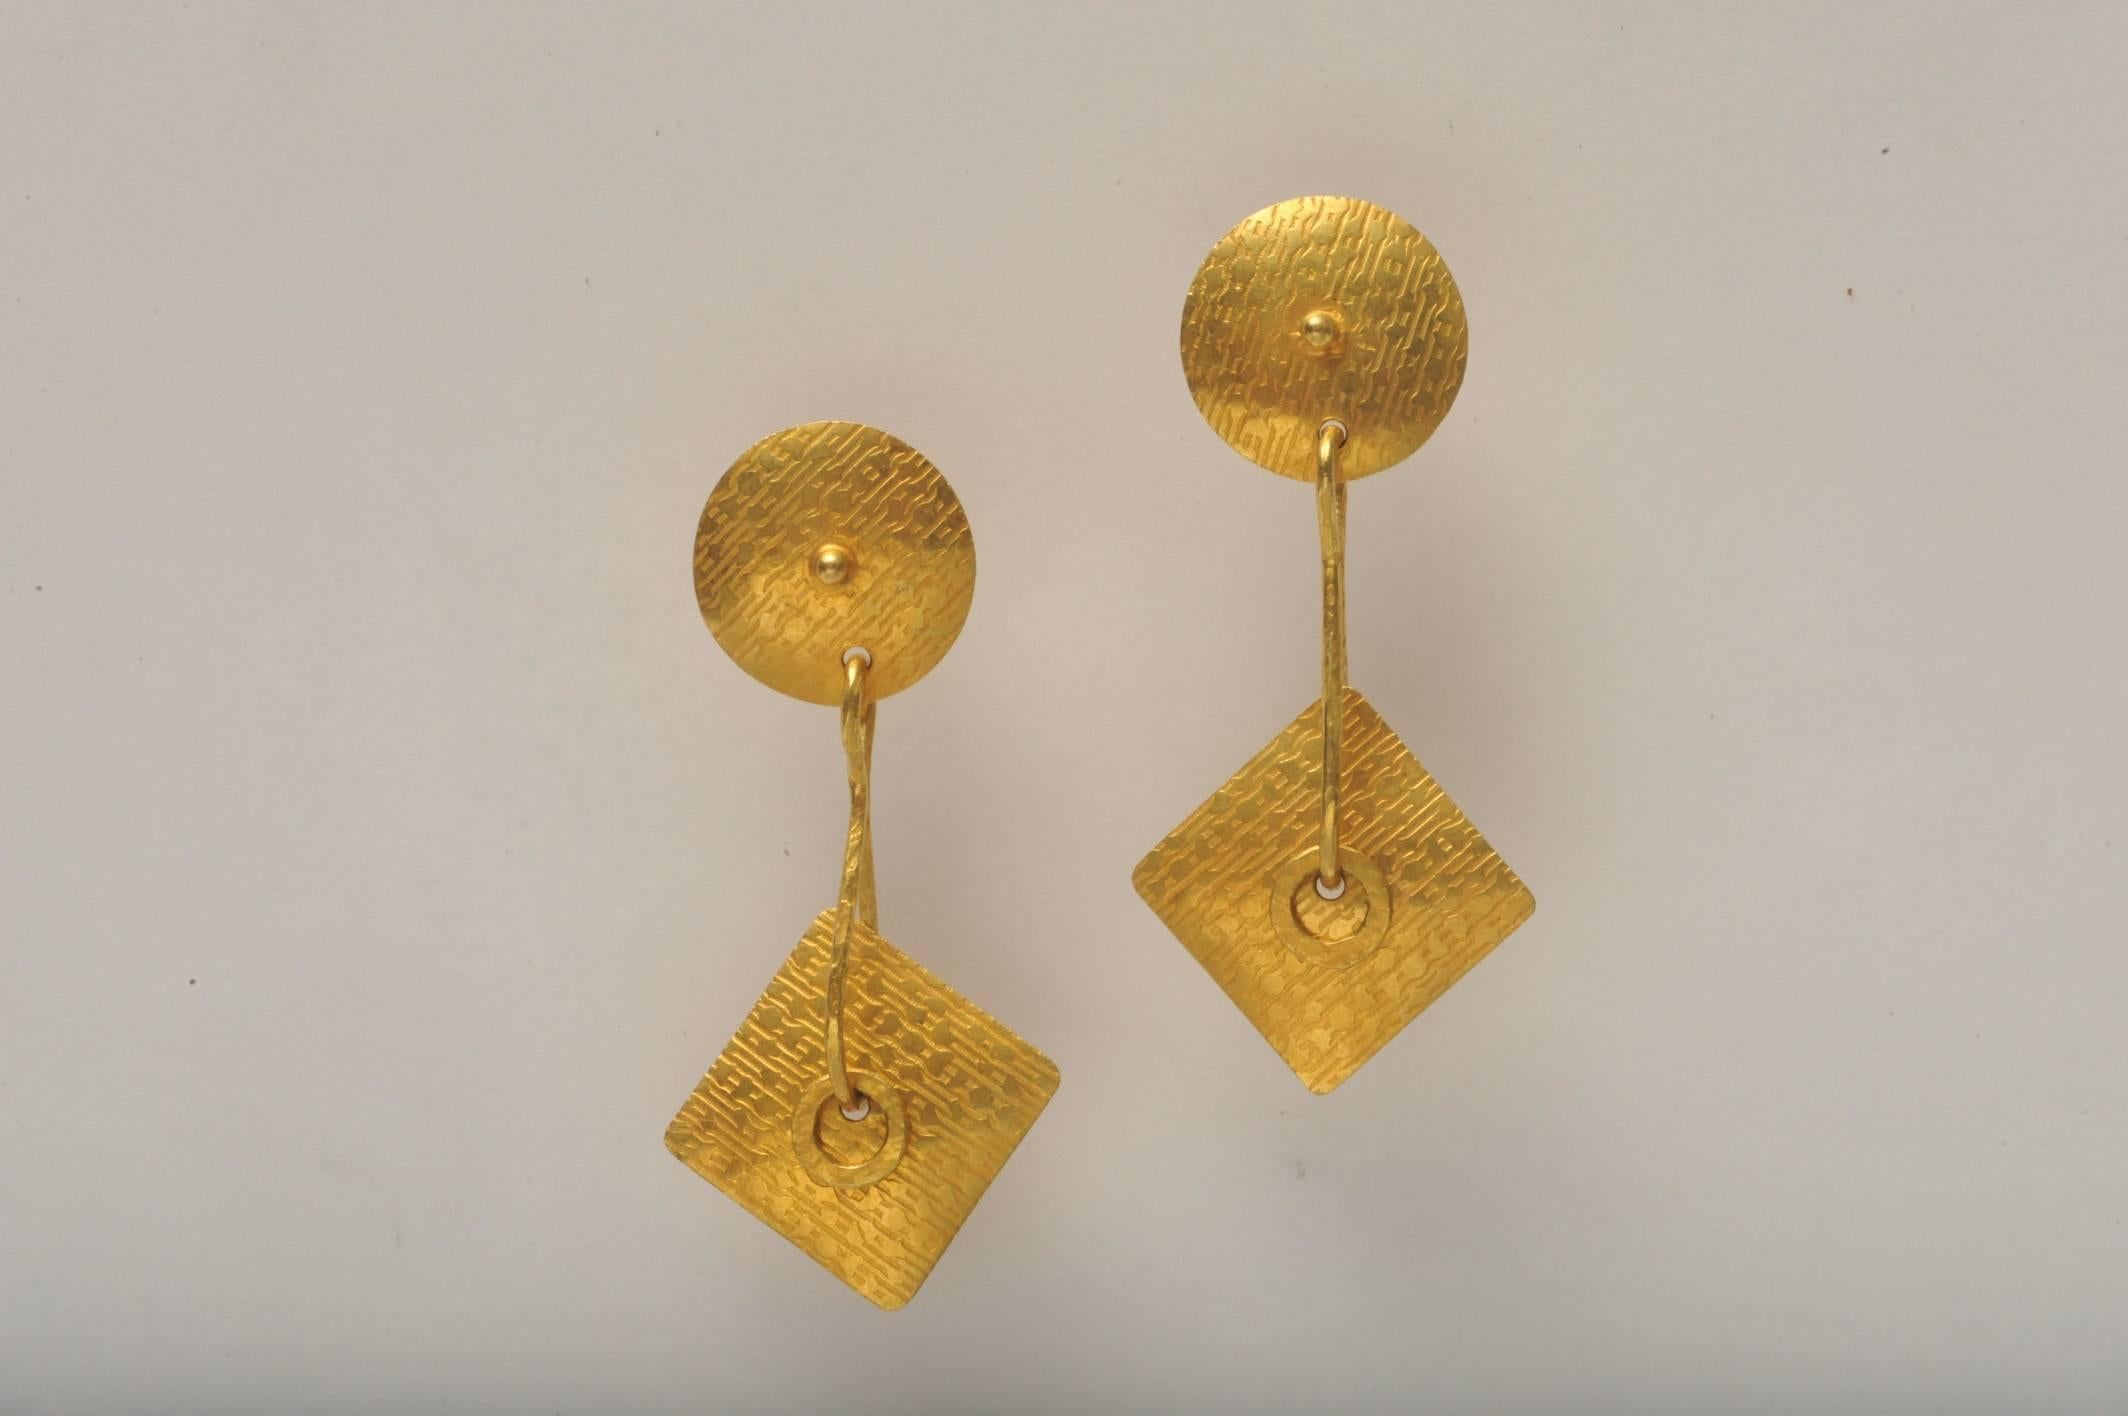 Unusual Art Deco, 22K gold earrings with fine hand-tooling design on the face of the earring.  Bottom portion is not fixed so offers movement through the loop.   Post back for pierced ears.